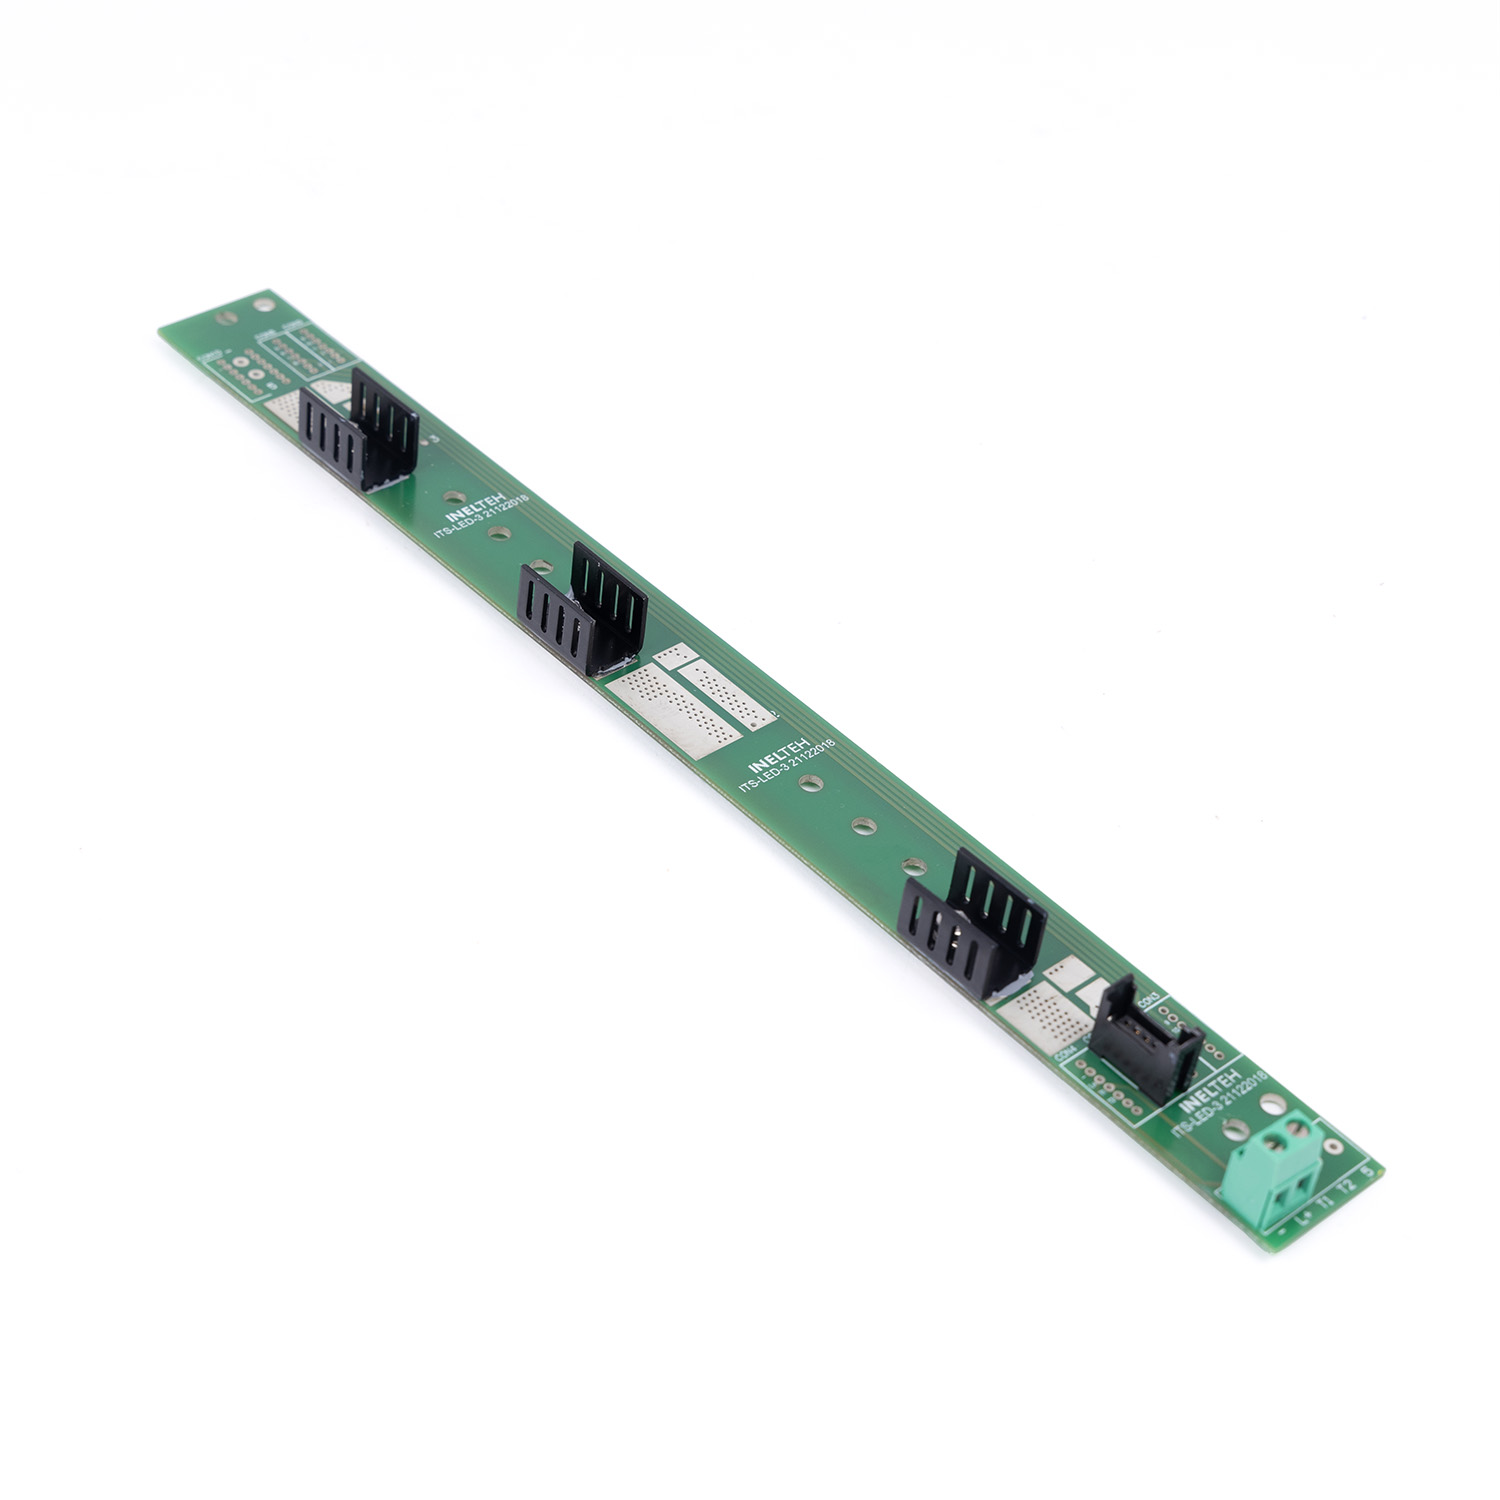 110-01-001 ITS-LED-1, PCB module for ITS-01 and 02 light columns